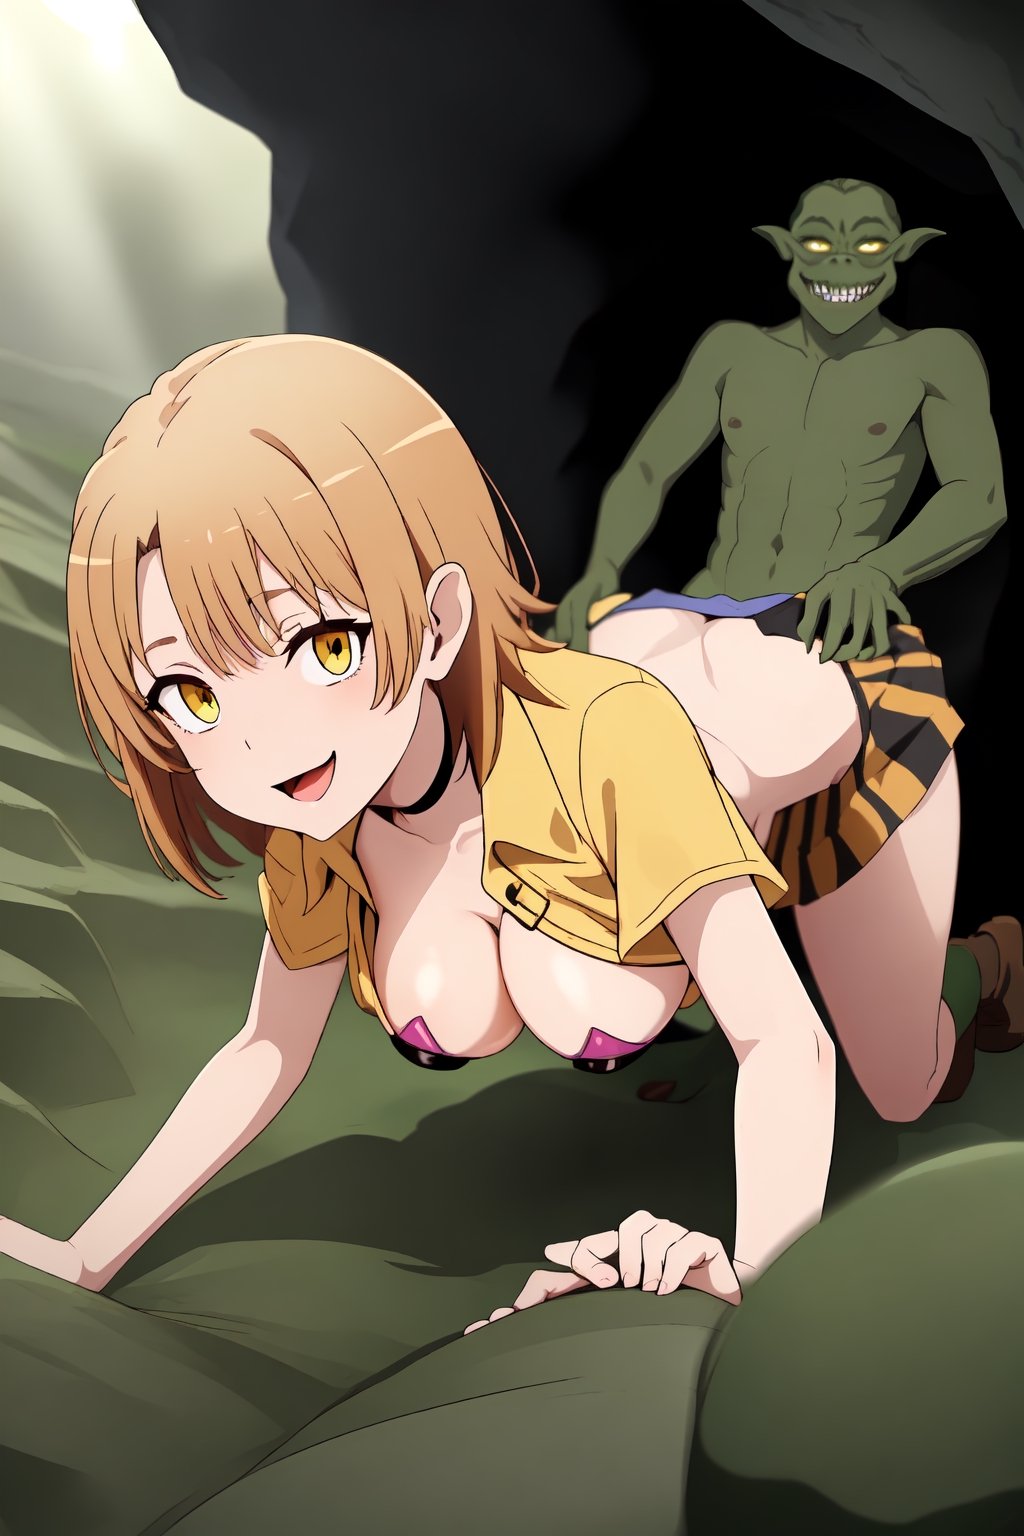 uncensored, decensored, 
High quality, best detail, beautiful picture, 

Iroha Isshiki, solo, short hair, Iroha is about 156cm, 
short body, medium-large tits, thin thighs, 
trouble smile, little open mouth, orange eyes, 
perfect fingers, perfect thumbs, 
look at viewer, welcome goblins,  

thin black choker, black micro bikini, 
Amesque, first high school girl, 
(((black micro bikini edge and strings is white))),
((white strings and edged black micro bikini tops and bottoms)), 

Her chest is open and her bikini bra is seeing from open shirt, 

((see-through pale yellow shirt)), 
(((orange mini skirt)), 

dark brown socks, dark brown shoose,

((school environment theme:1.5)), yellow shirt front full open, 
(((short sleeve pale-yellow shirt rolling up cuffs, not use buttoned, pale-yellow shirt_collor, chest wide open, shirt tied-up on stomach))),

short length shirt, 

Iroha being captured by goblins, 
dark green skin goblin, 
(((multiple goblins are surrounding iroha))),
many naked goblins are surrounding Iroha,
some nude goblins are standding behind Iroha,


in the deep cave, cave prison, large cave, 
day time, day light, wide cave full of goblins, 

orgy, group sex, rinkan, gangbang, sex, fuck, 
double penetration, fucked from behind,


very long and fat penis, 
double handjob, 


((((grabbed boobs by goblins very hard)))), 
in the cave,

Goblins are holding his dick and masturbating,

prisoner, (((grabbed her boobs))),
brabbed tits from behind, 

undressed by goblins, sucked her nipples by the goblins,

(((((grabbed her tits by the goblins very hard))))),

pale nipples, nipples on pink, erect nipples, 
((((double handjob)))), vaginal cum, 

(((lots of goblins is flocking to Iroha))),
(((grabbed boobs by goblins very hard))), 

(((she is being double handjob))), 

(((all fours))), undressed, fucked by the goblins from her behind, 
green_dicks_everywhere, double penetration, group sex, orgy, 
(((front view))),  sliding bra, seeing her nipples,  , front view doggystyle, nude, topless, DEEPTHROAT